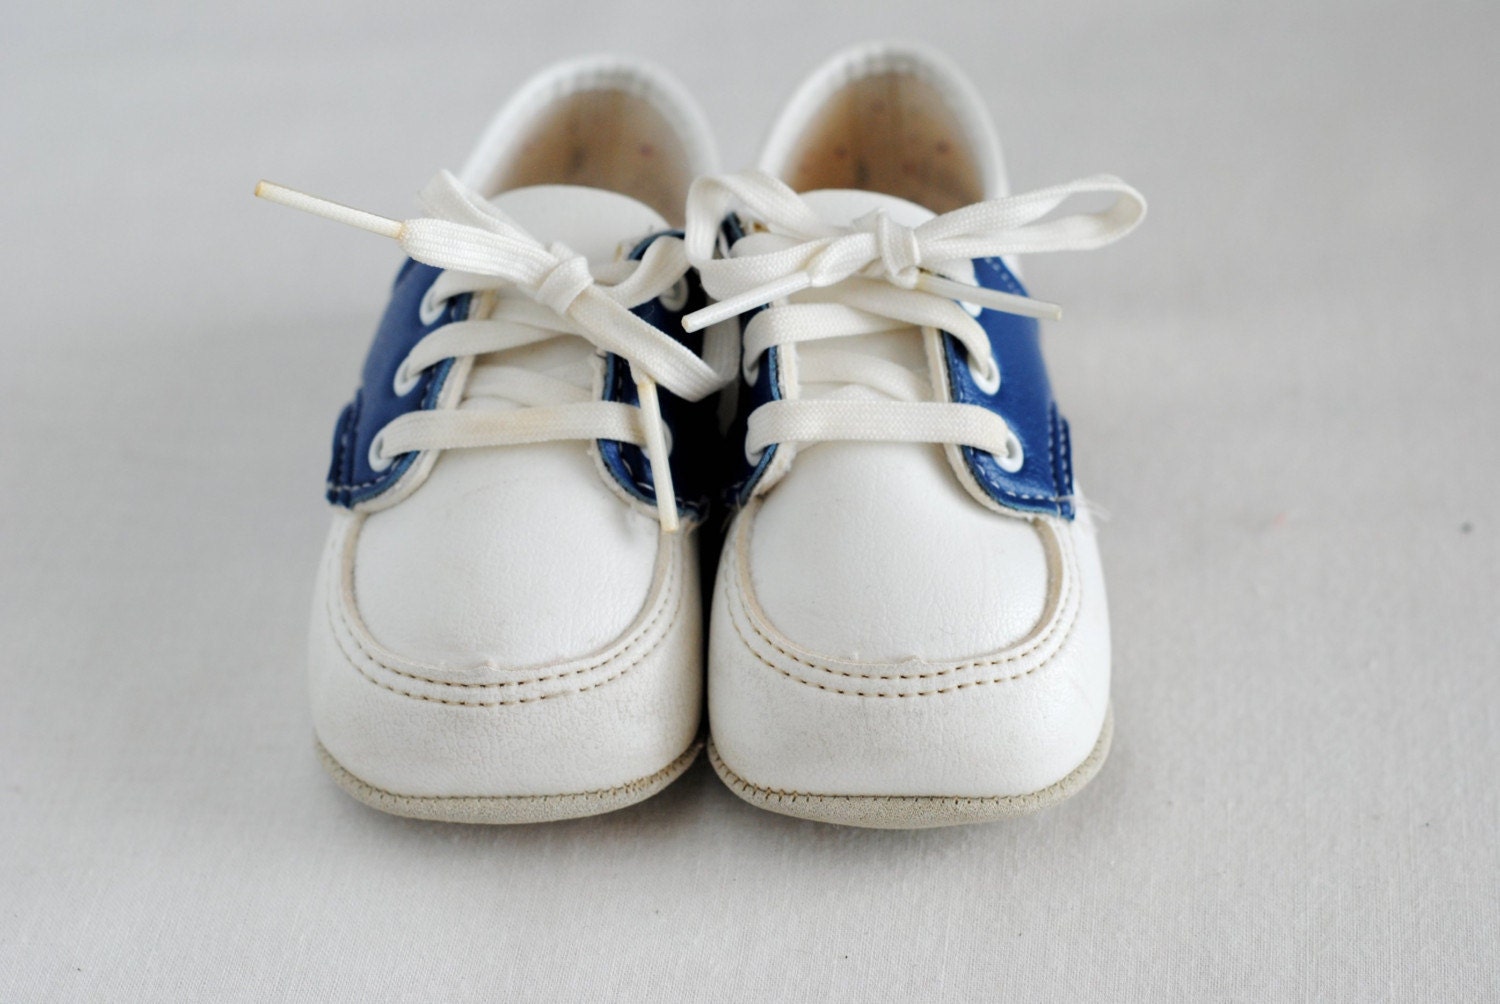 Vintage Baby Blue Saddle Shoes by HartandSew on Etsy